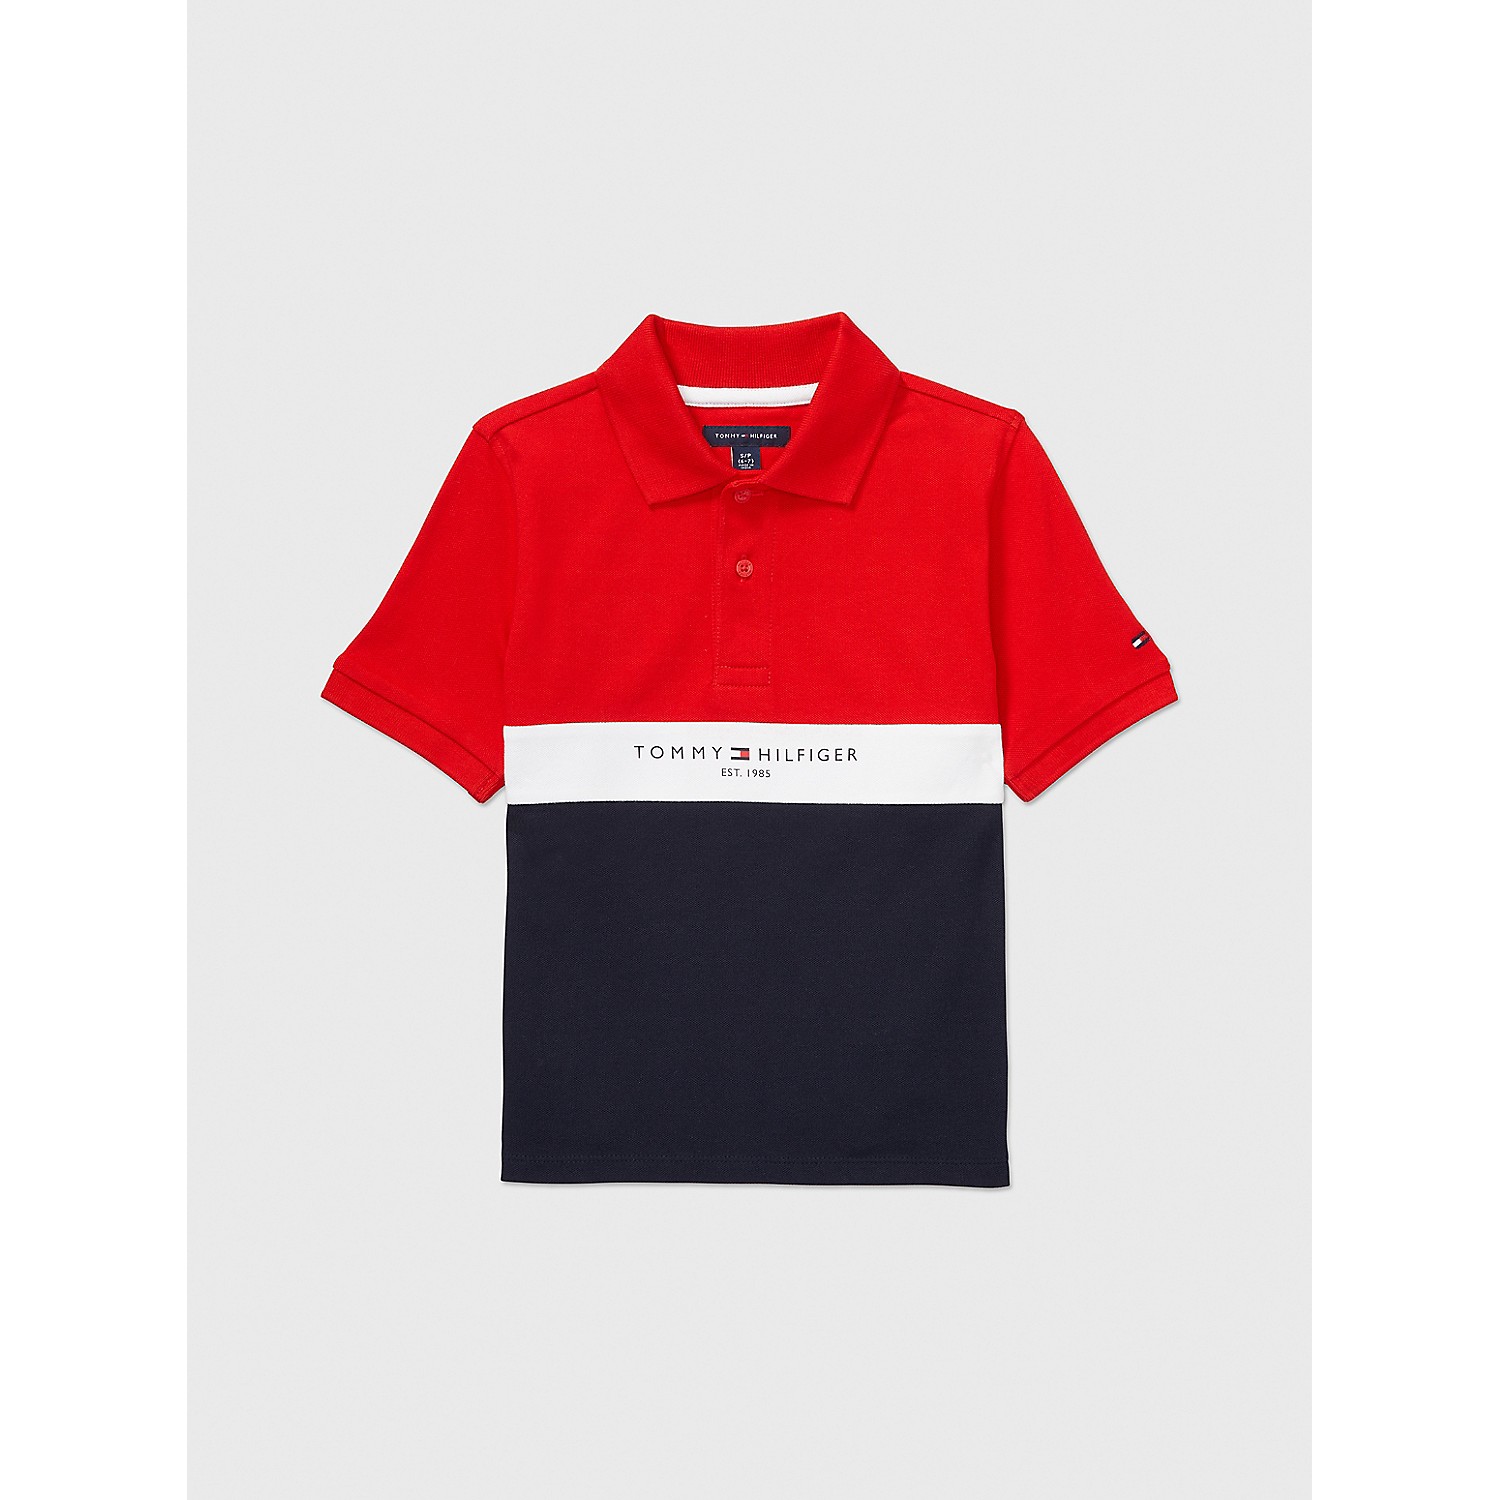 TOMMY HILFIGER Kids Seated Fit Flag Block Polo